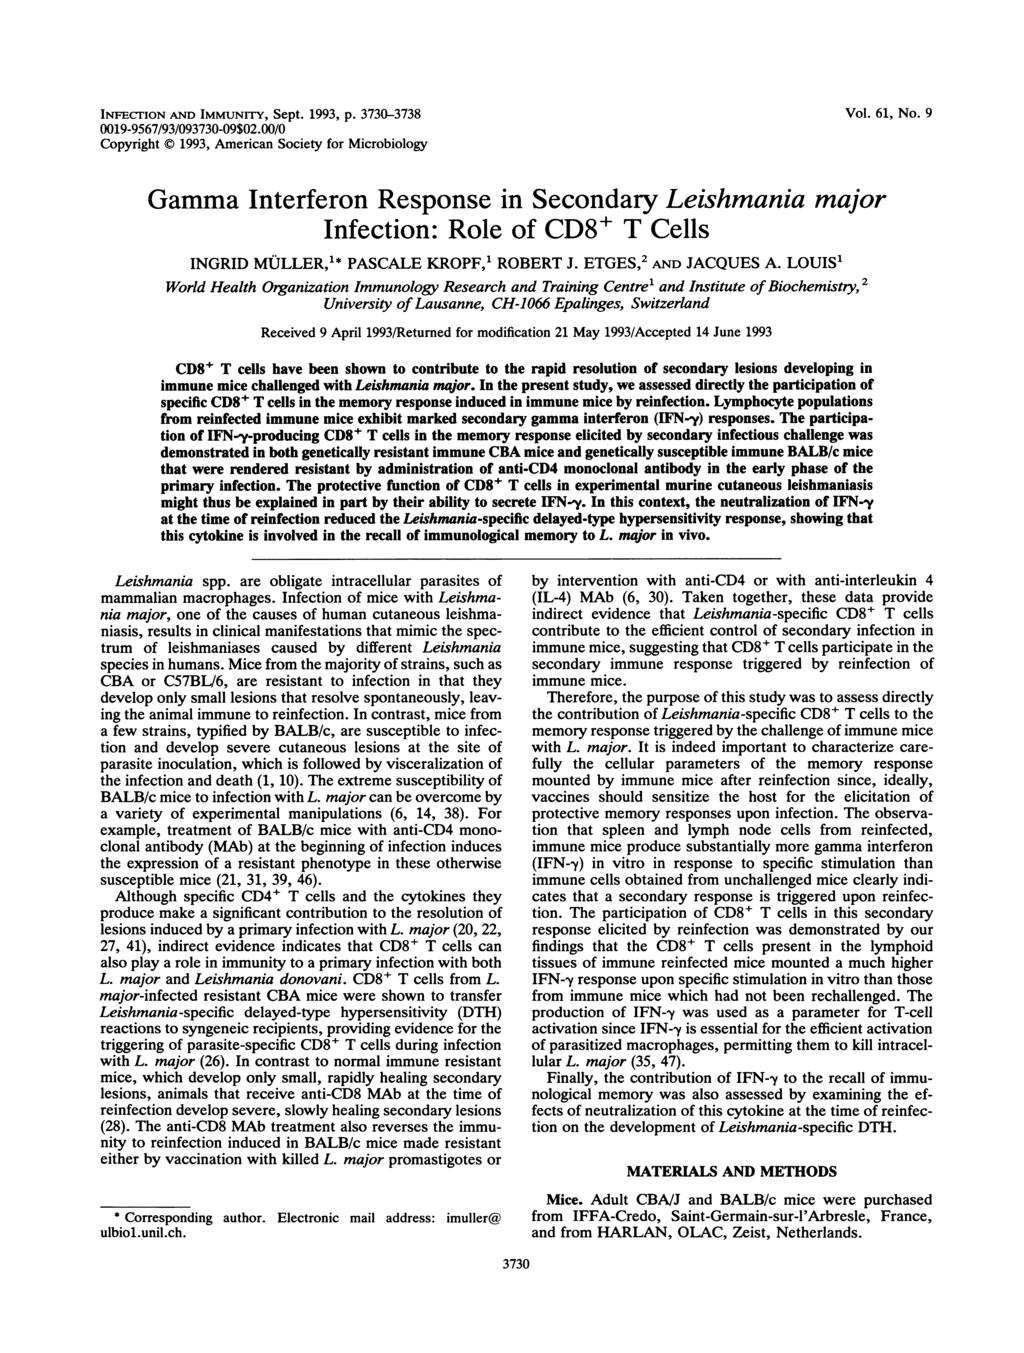 INFECrION AND IMMUNITY, Sept. 1993, p. 3730-3738 0019-9567/93/093730-09$02.00/0 Copyright X 1993, American Society for Microbiology Vol. 61, No.